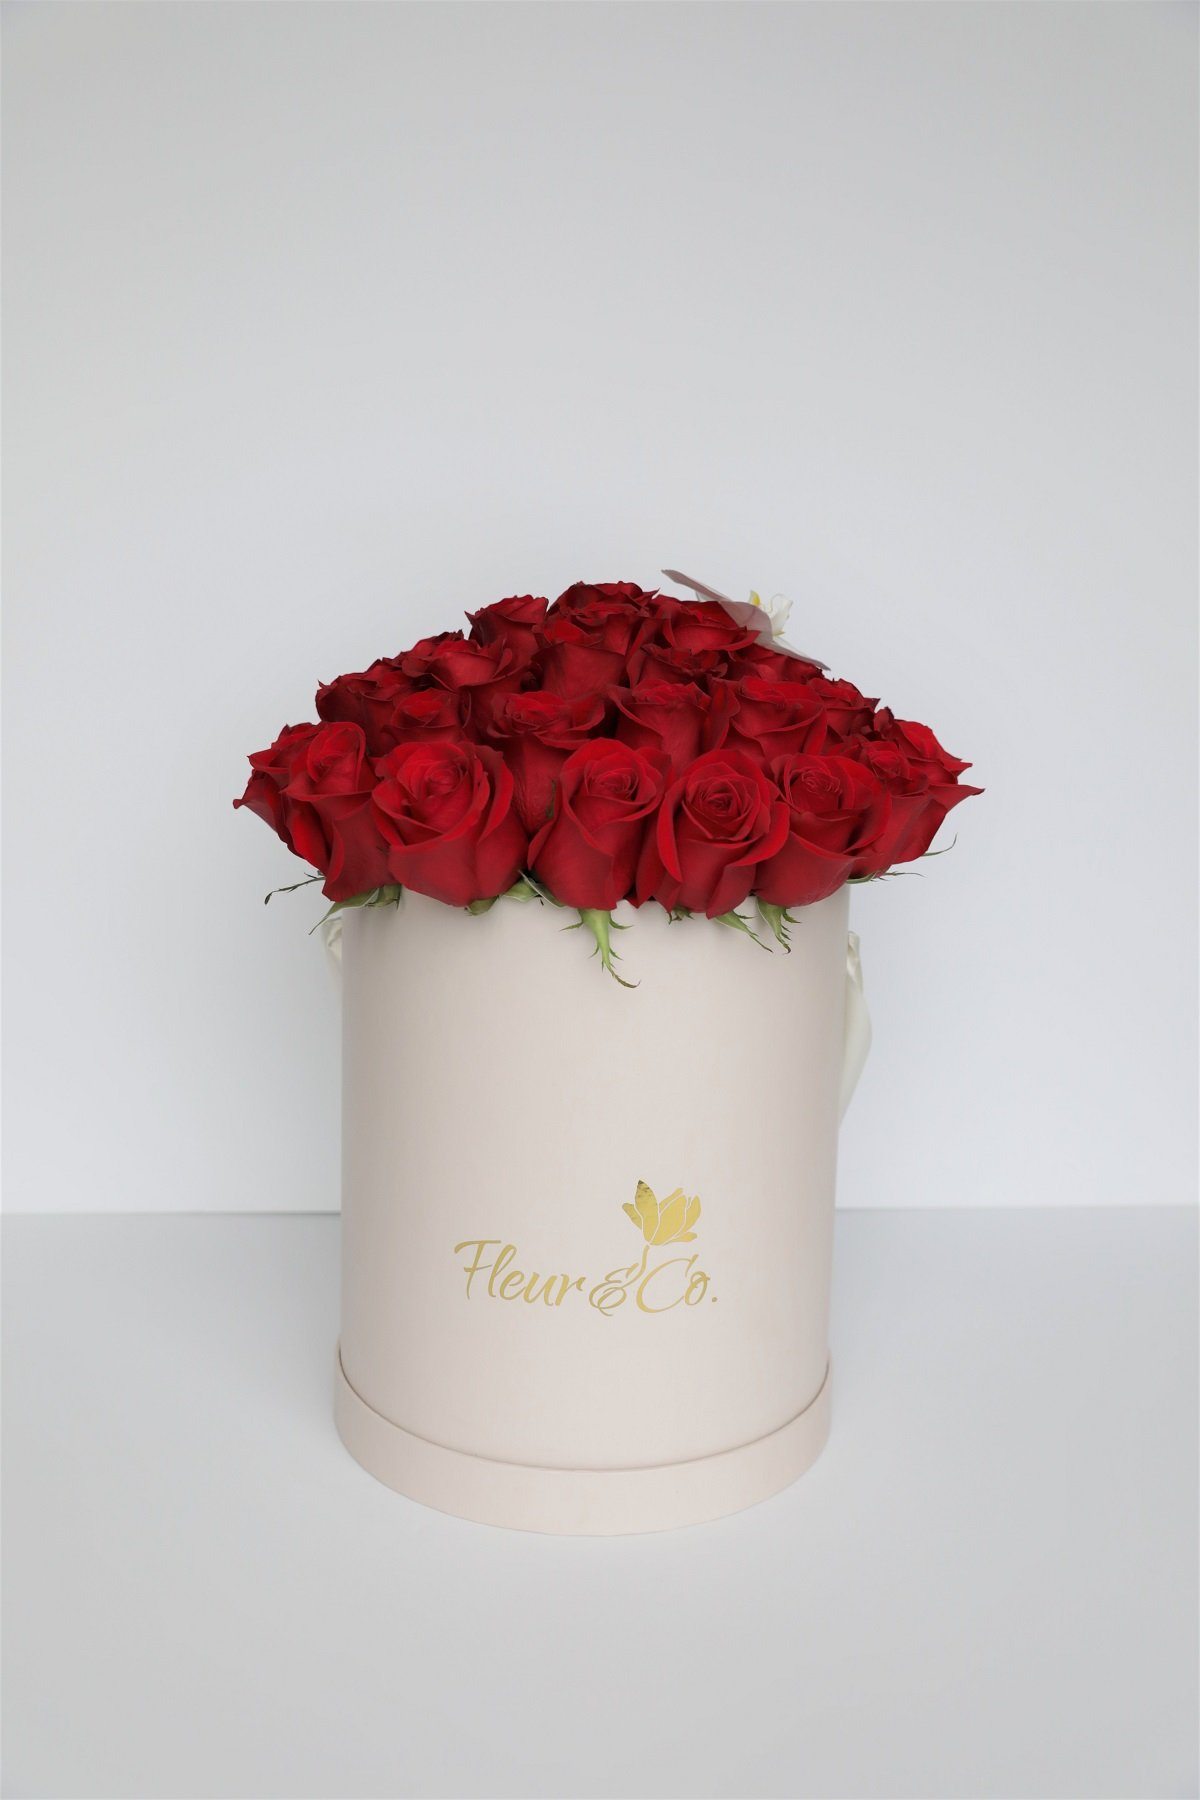 Roses in a hat box - Extra Large - Fleur & Co.